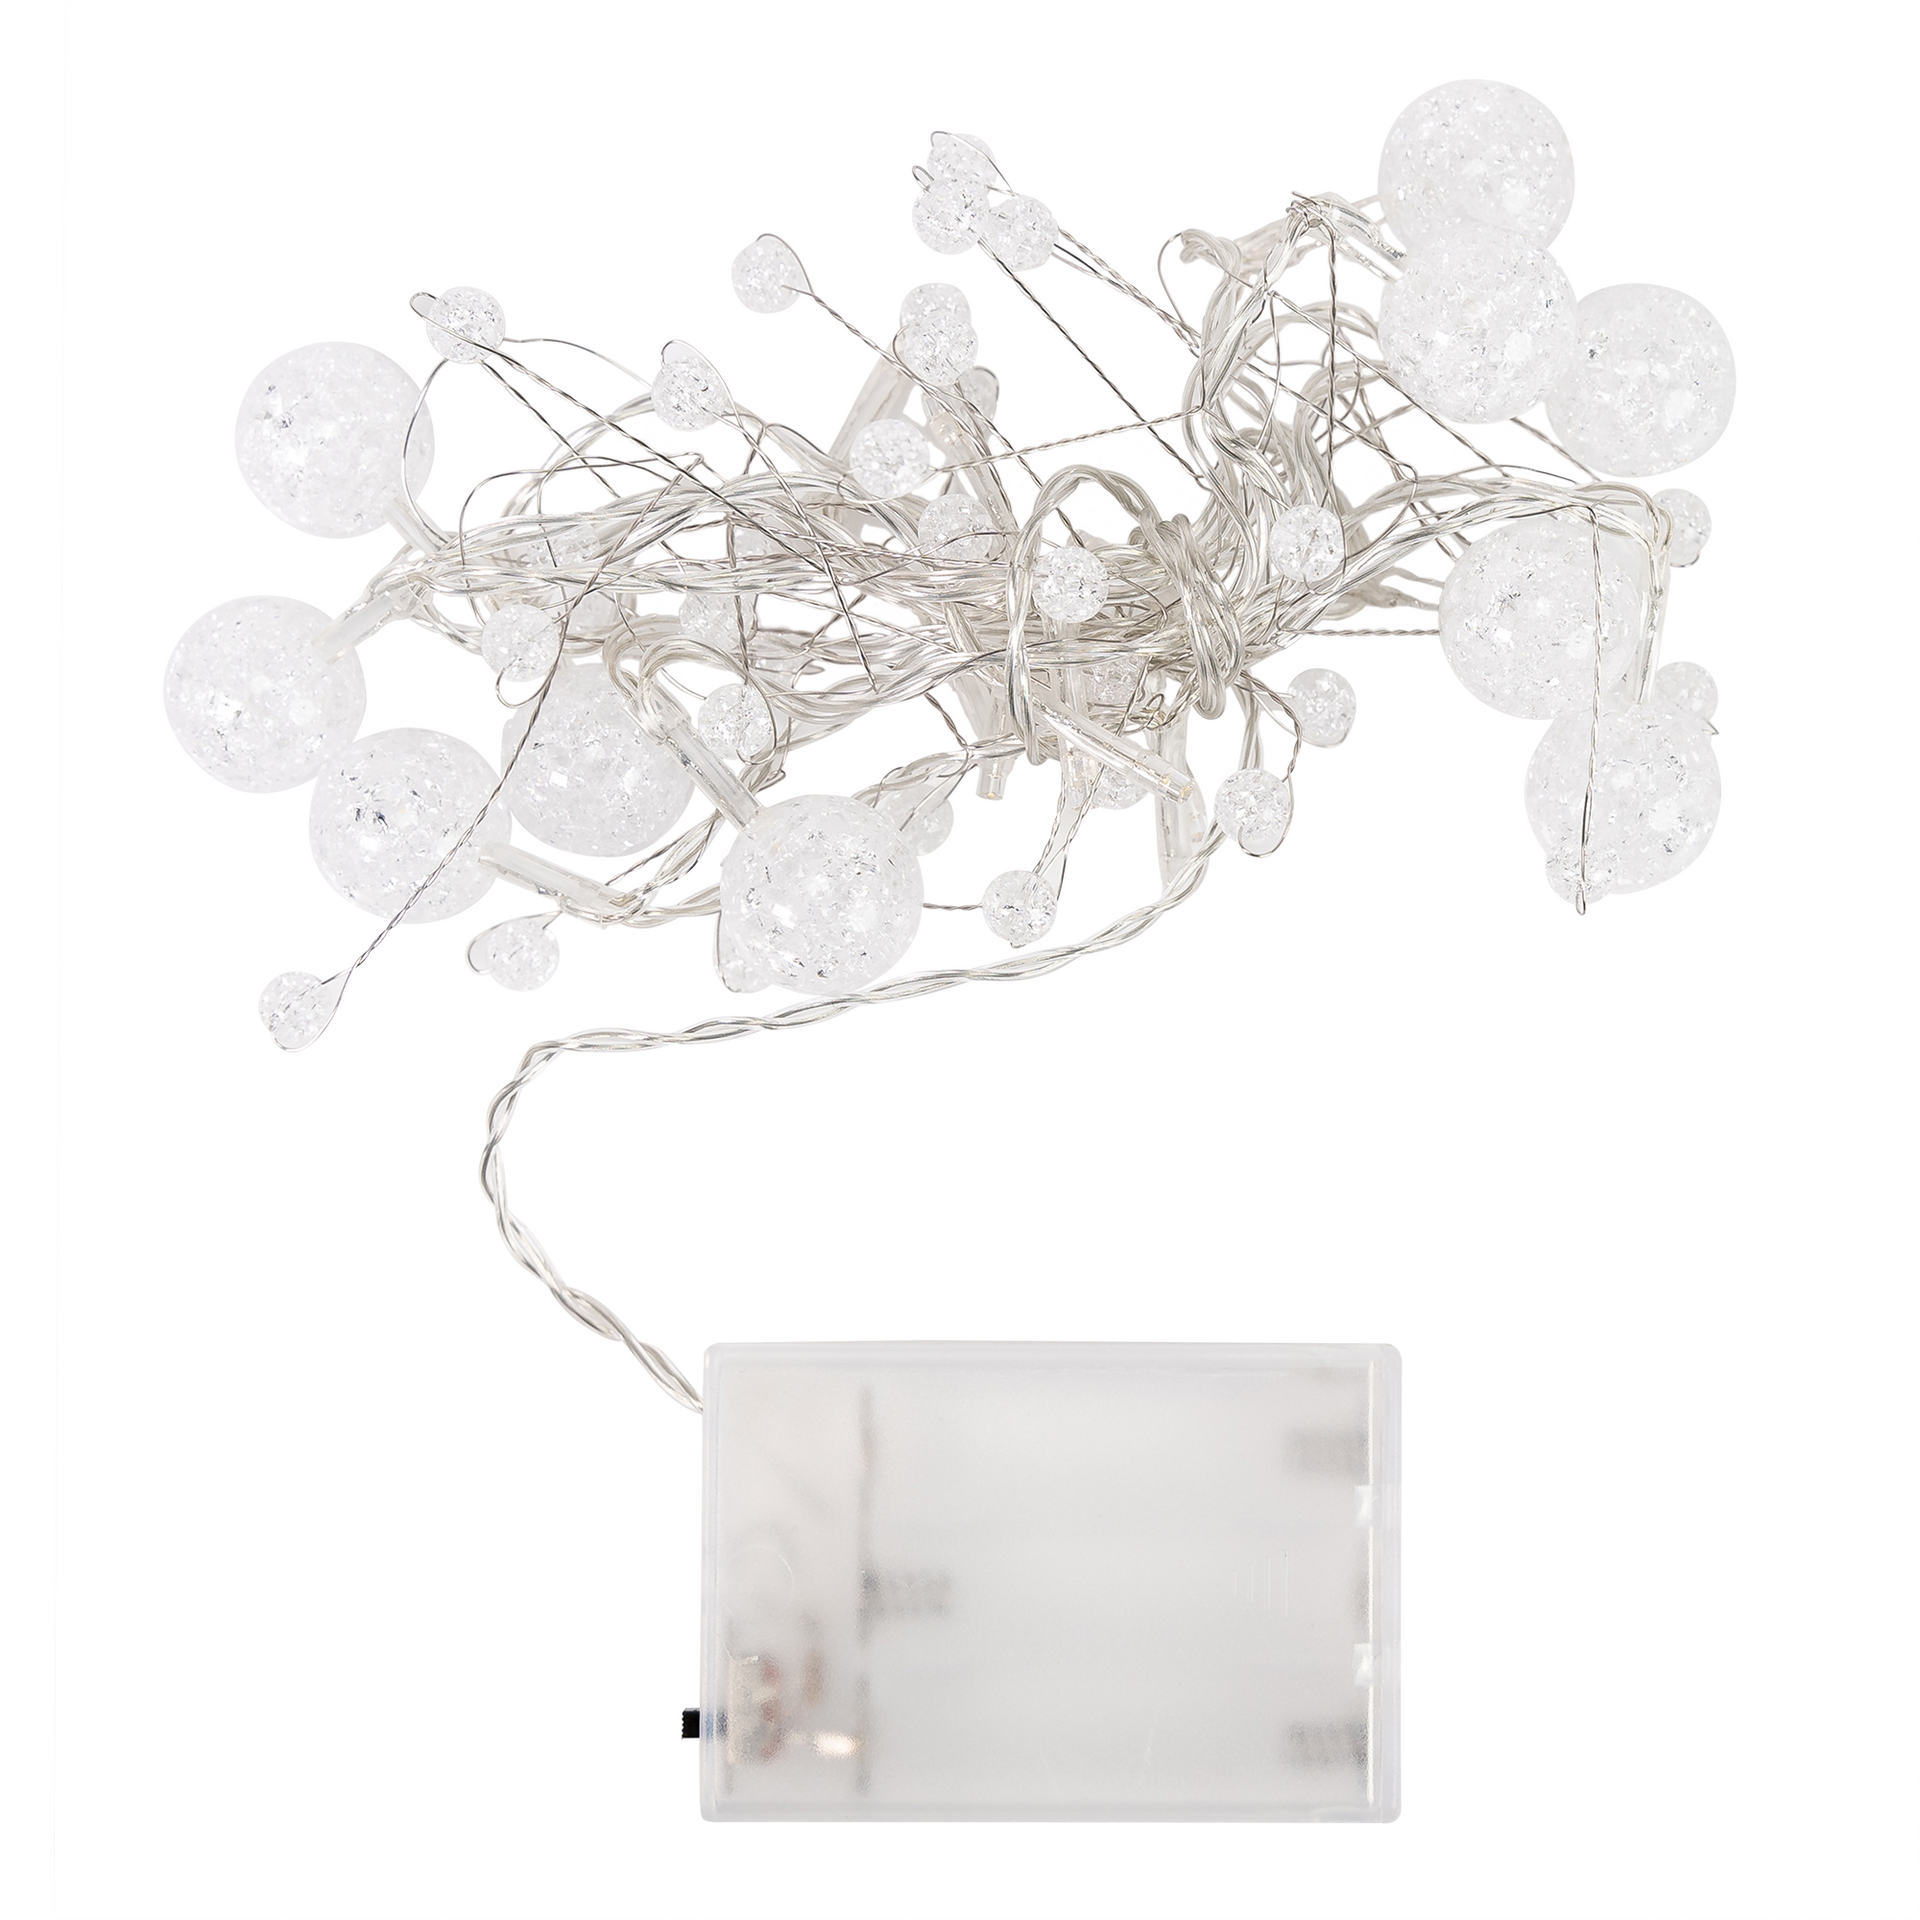 20 LED Clear Balls and Beads String Fairy Light 5.5 feet  Battery Powered, Warm White - West Ivory LED Lighting 